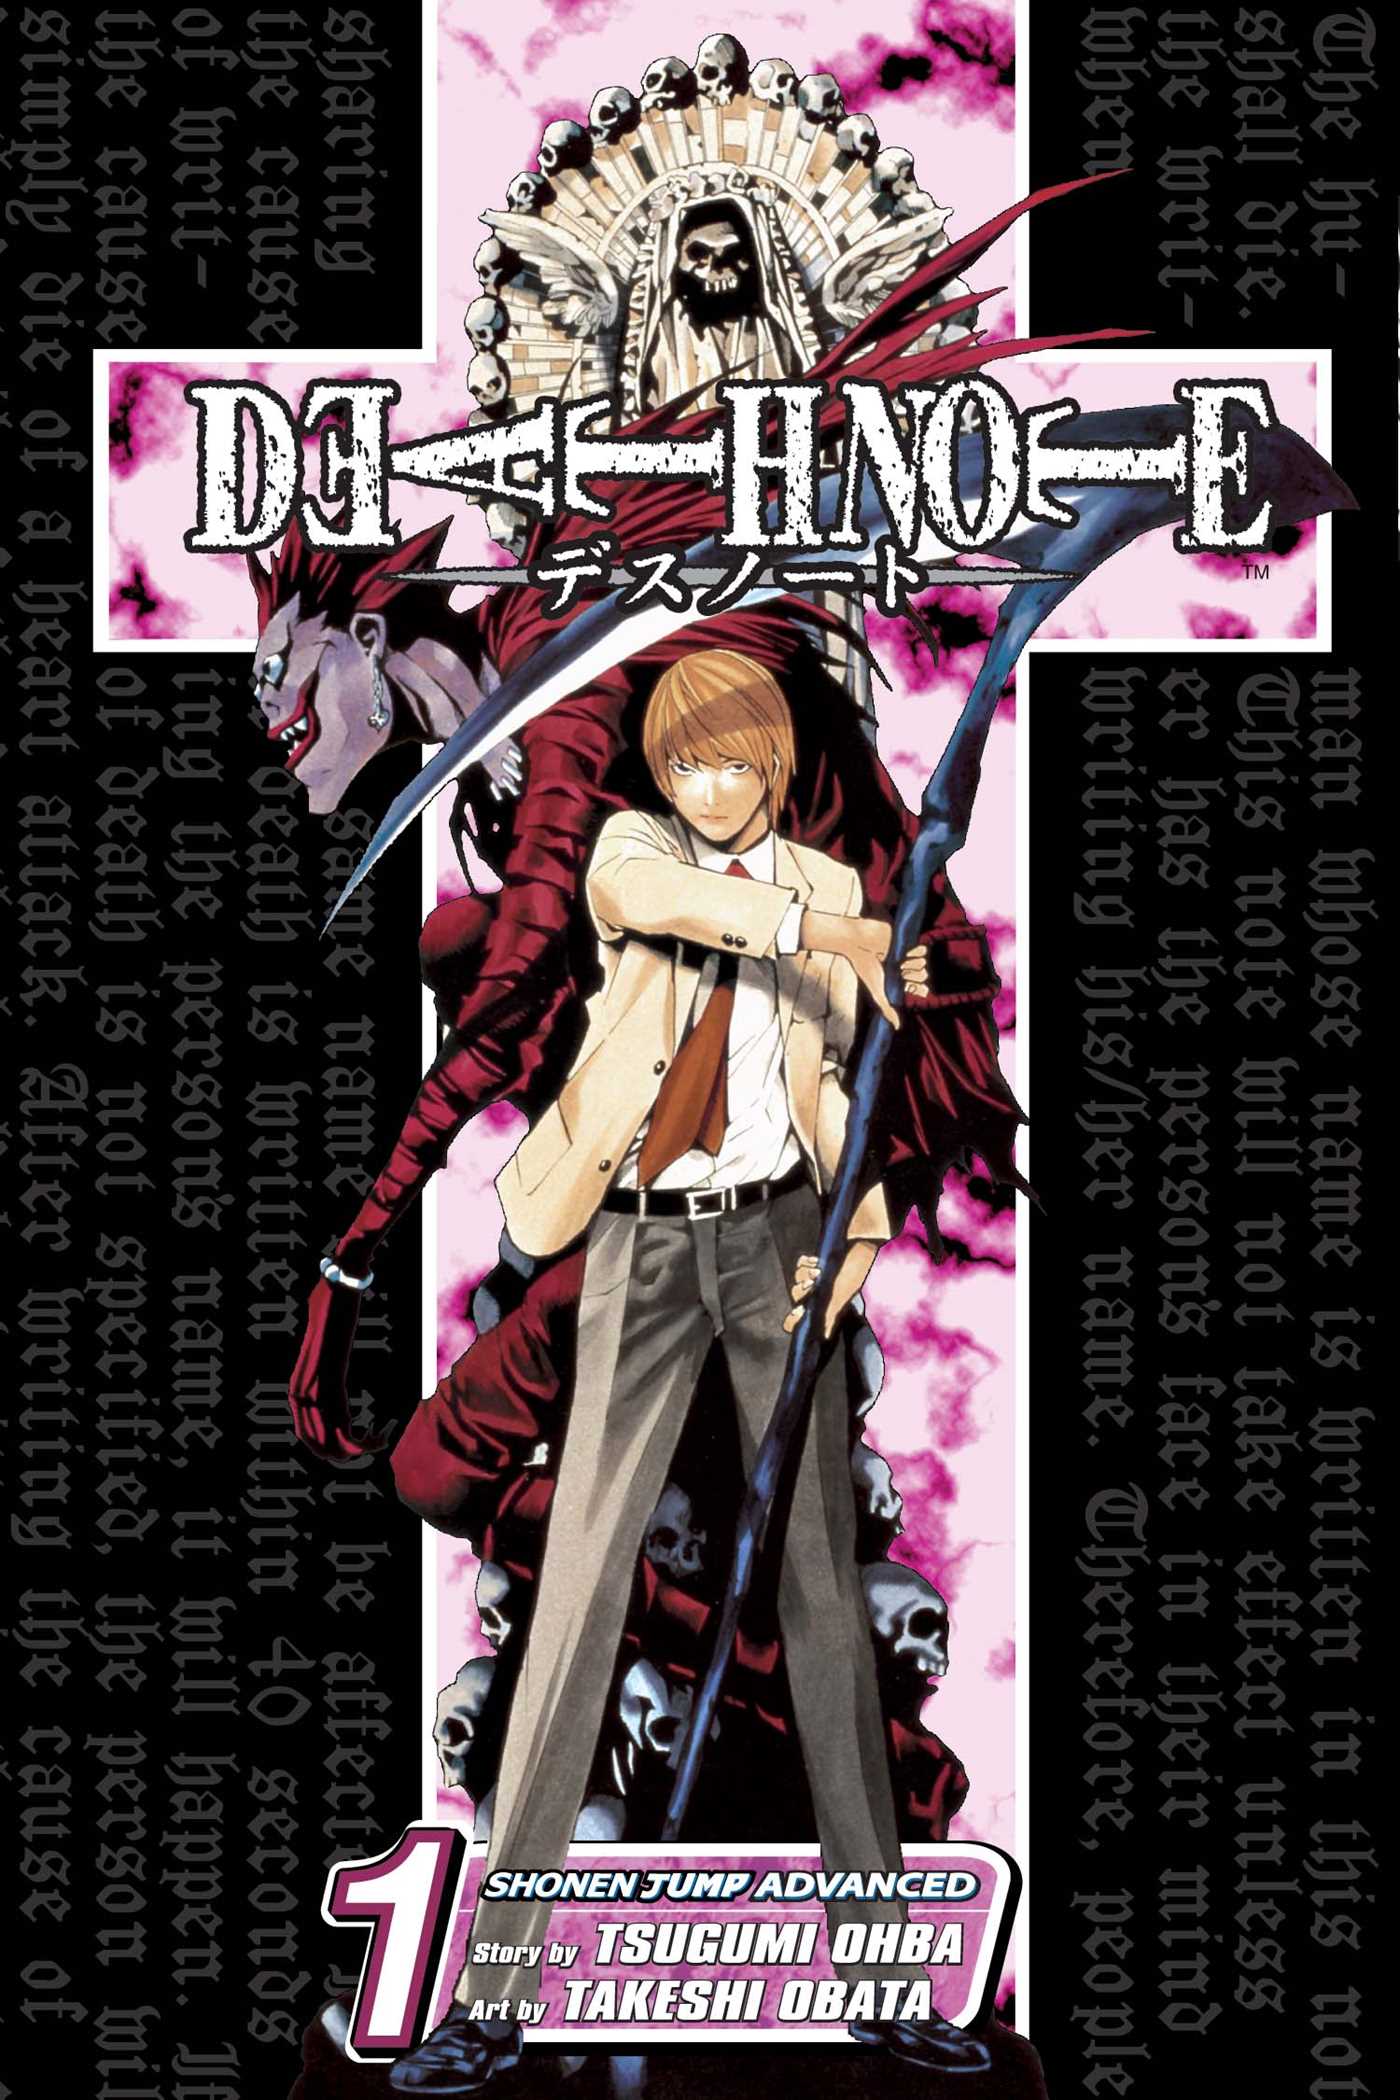 Book Jacket for Death Note Volume 1